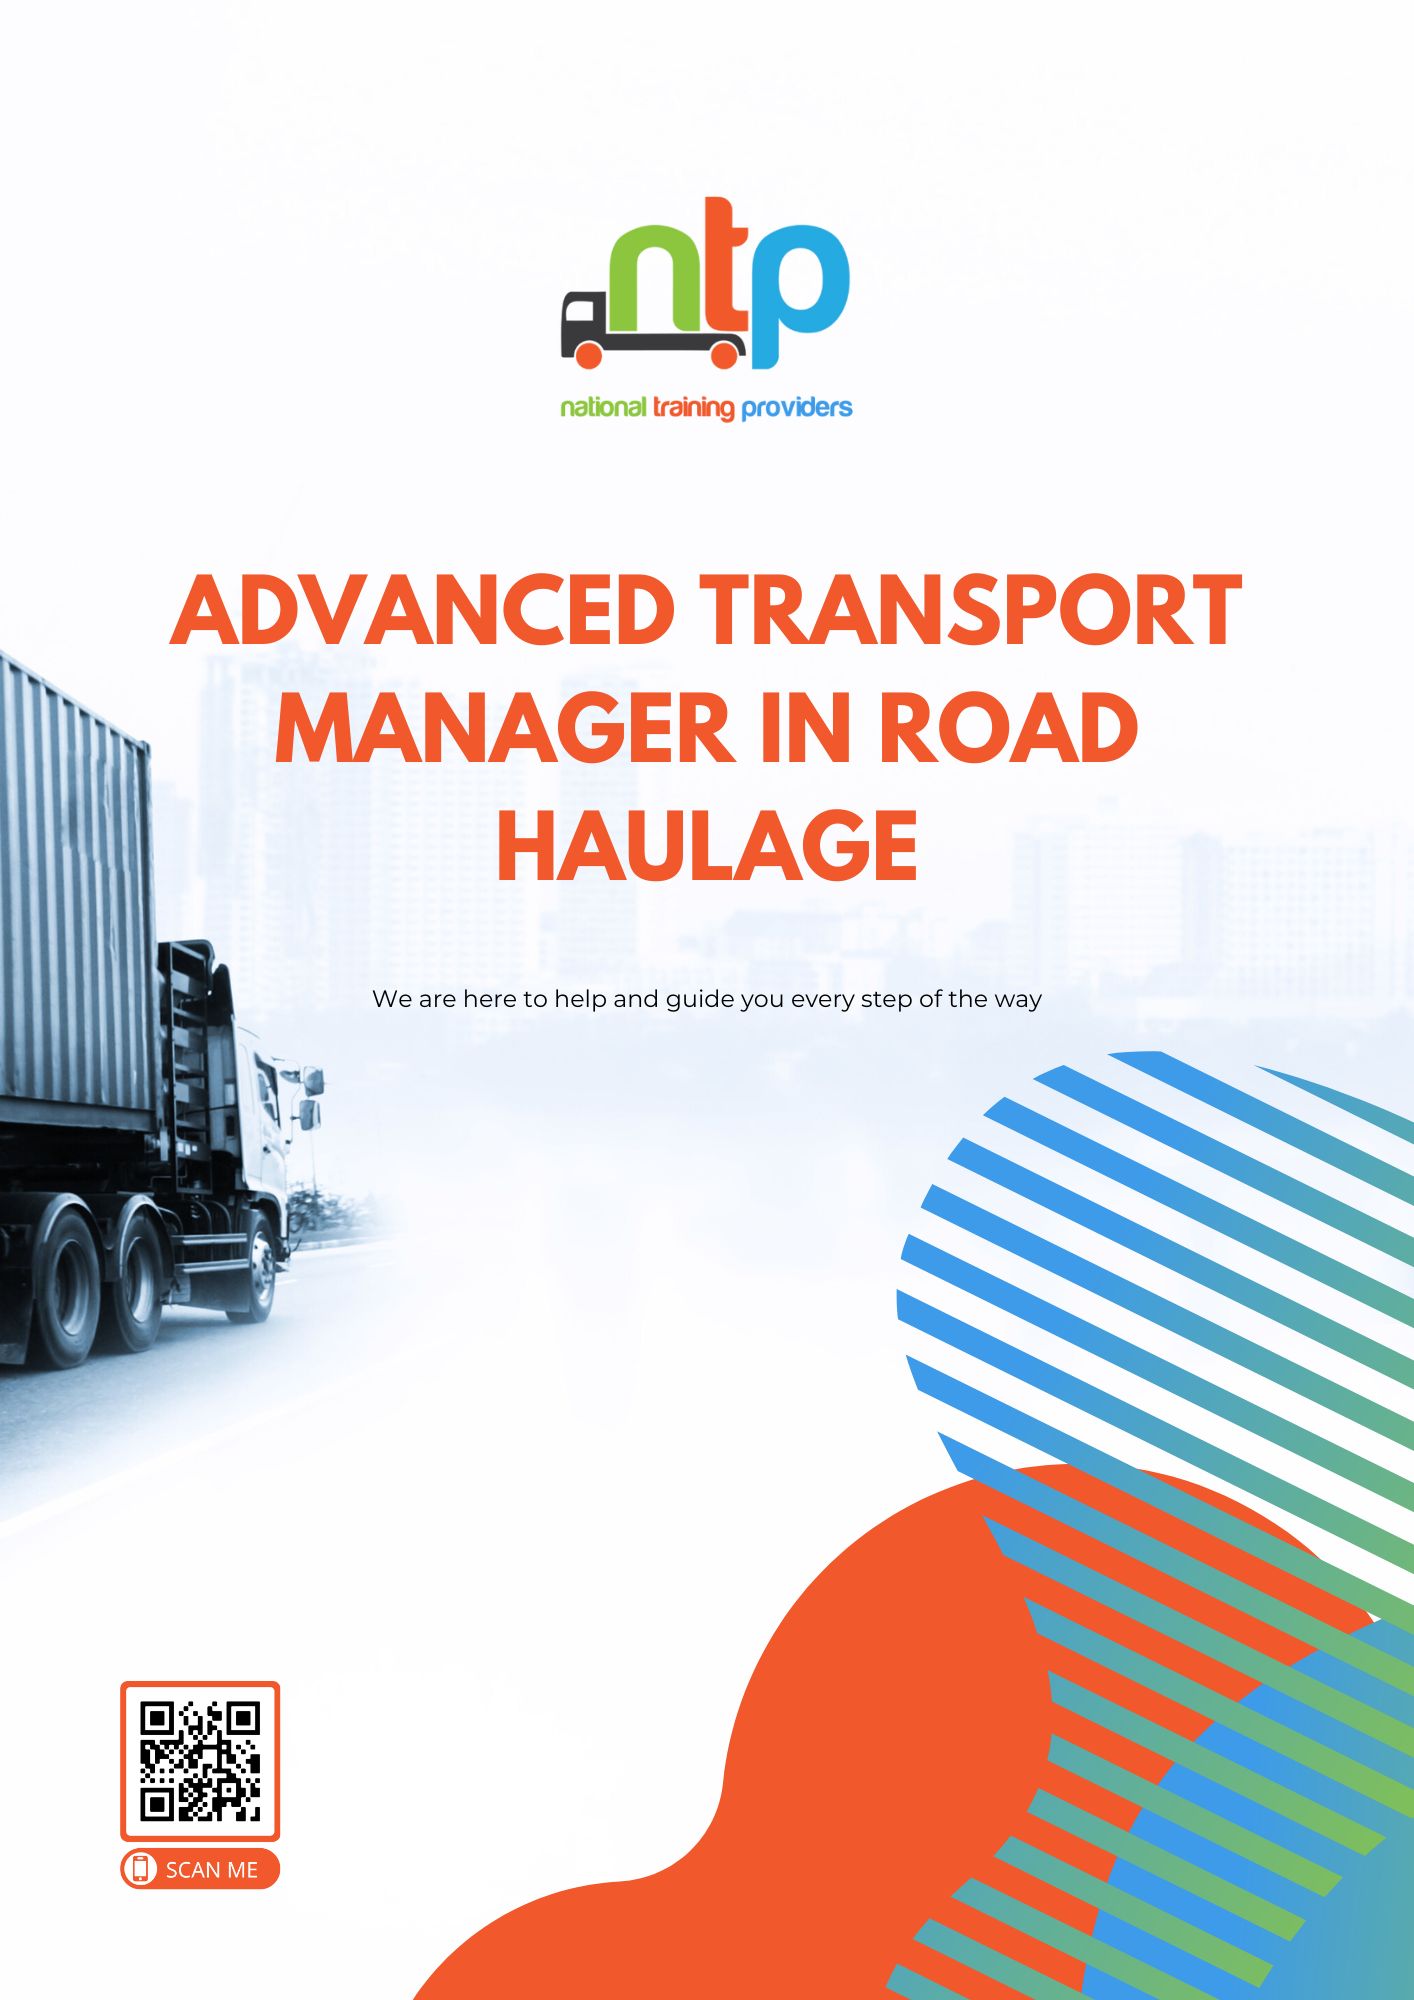 Download the advanced transport manager HGV course guide.